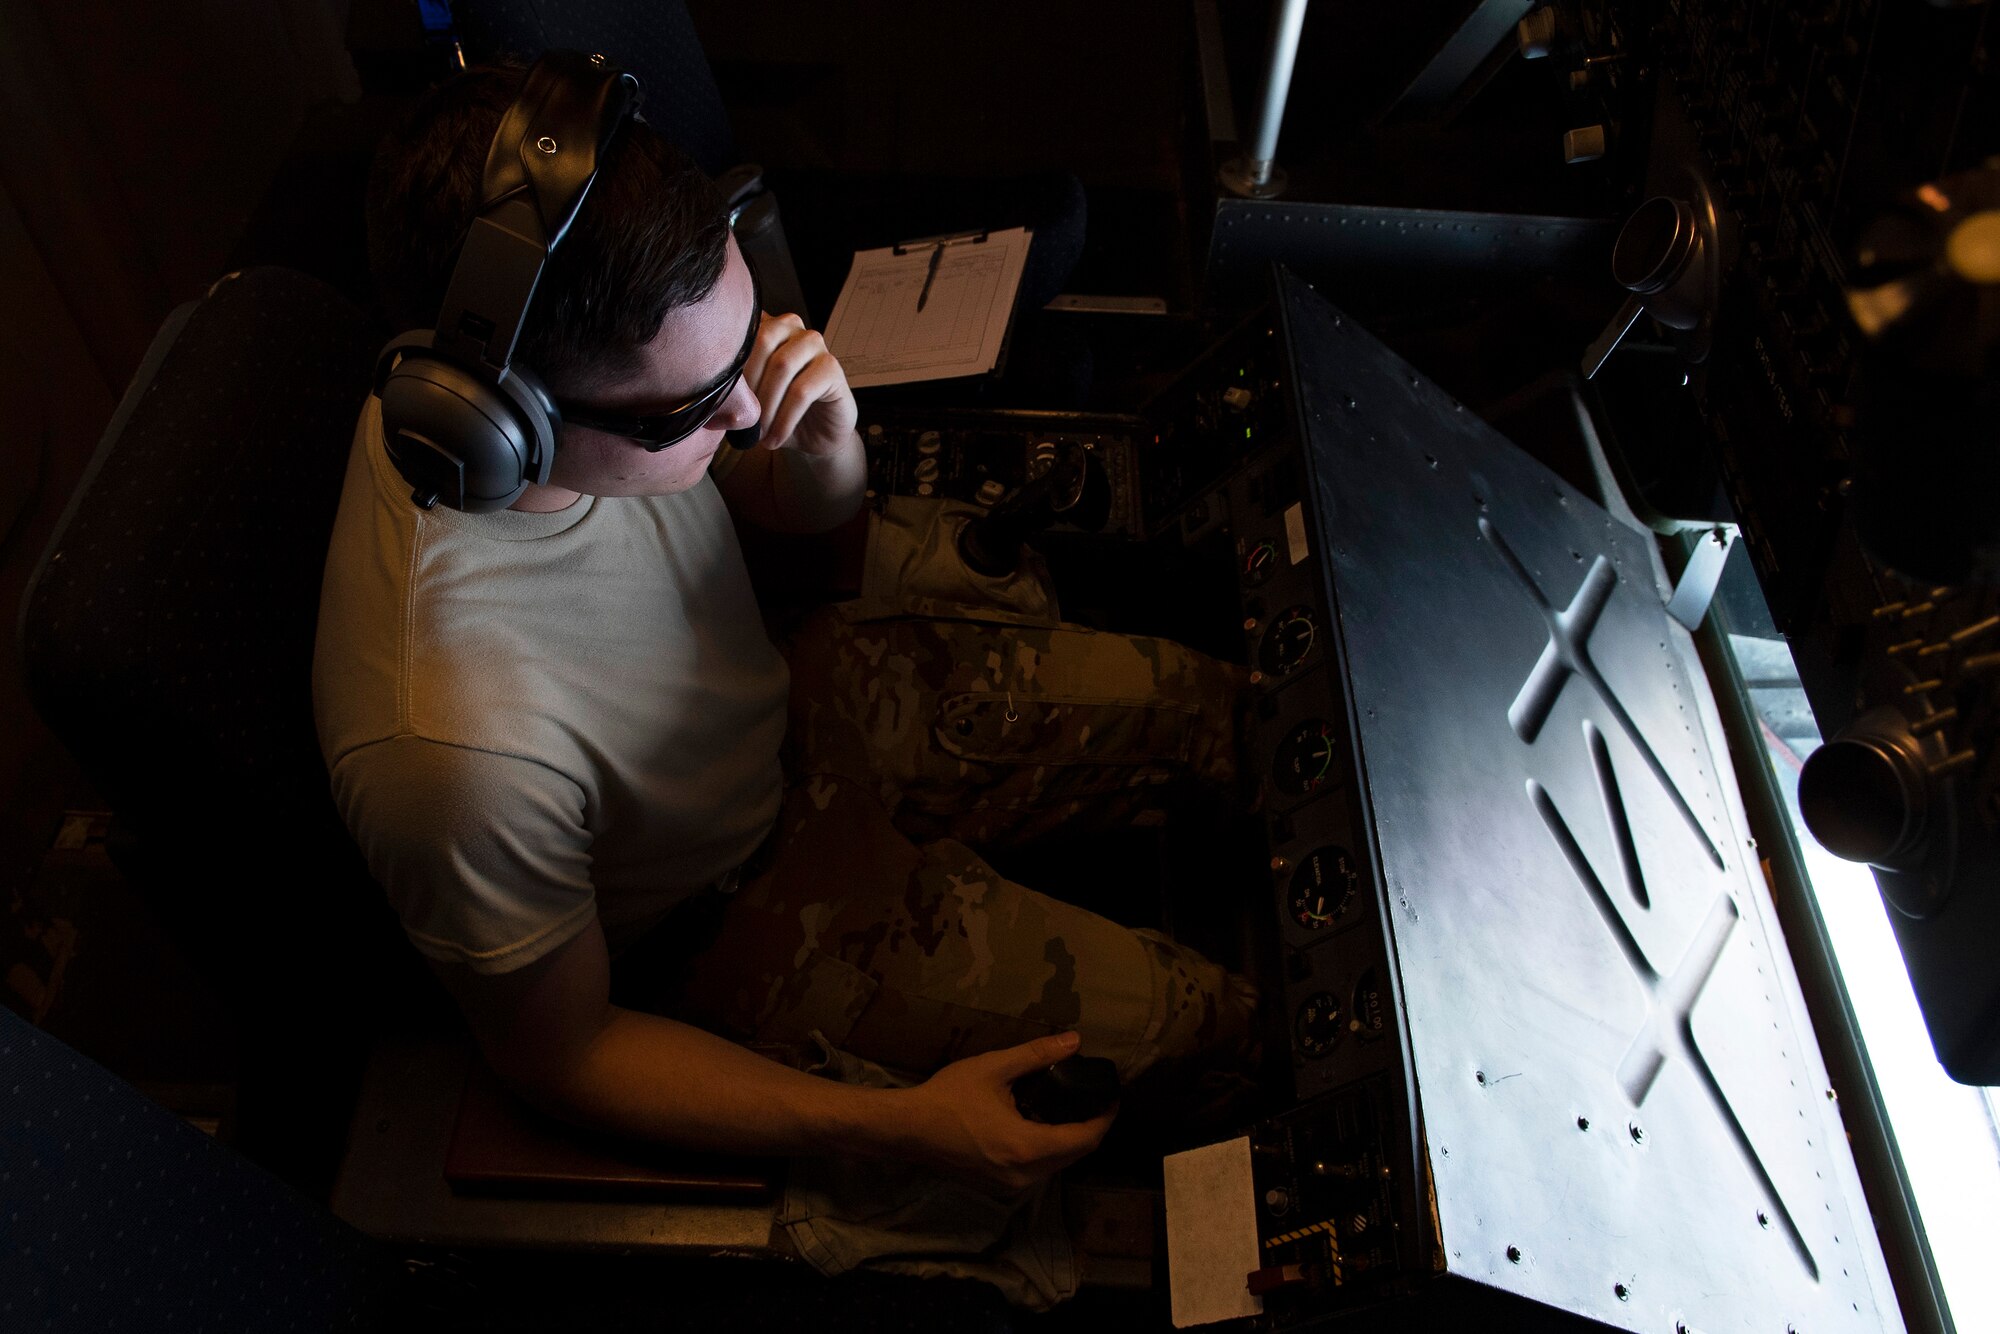 U.S. Air Force Senior Airman William Hulse, 2nd Air Refueling Squadron, Joint Base McGuire-Dix-Lakehurst, New Jersey, prepares to fuel a USAF F-22 Raptor July 14, over the Pacific Ocean near the coast of Brisbane, Australia, in support of Exercise Talisman Sabre 19. The Raptor was one of several aircraft used during TS19,  alongside other USAF and RAAF airborne warning and control system aircraft, refuelers, tankers and bombers. (U.S. Air Force photo by Senior Airman Elora J. Martinez)